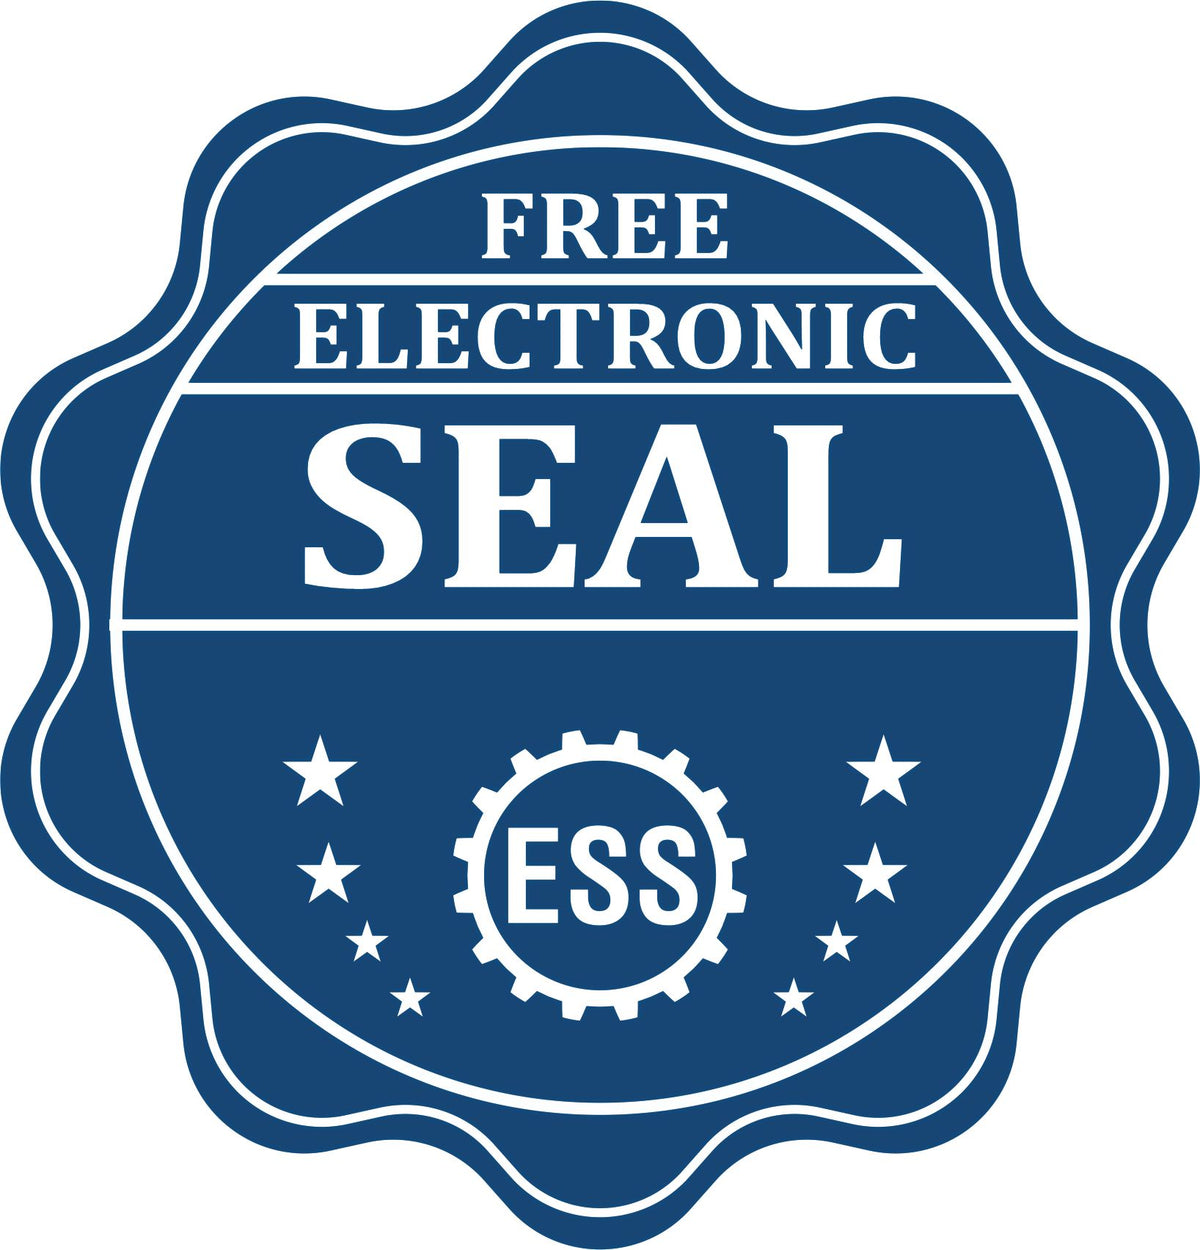 A badge showing a free electronic seal for the Heavy Duty Cast Iron Arkansas Land Surveyor Seal Embosser with stars and the ESS gear on the emblem.